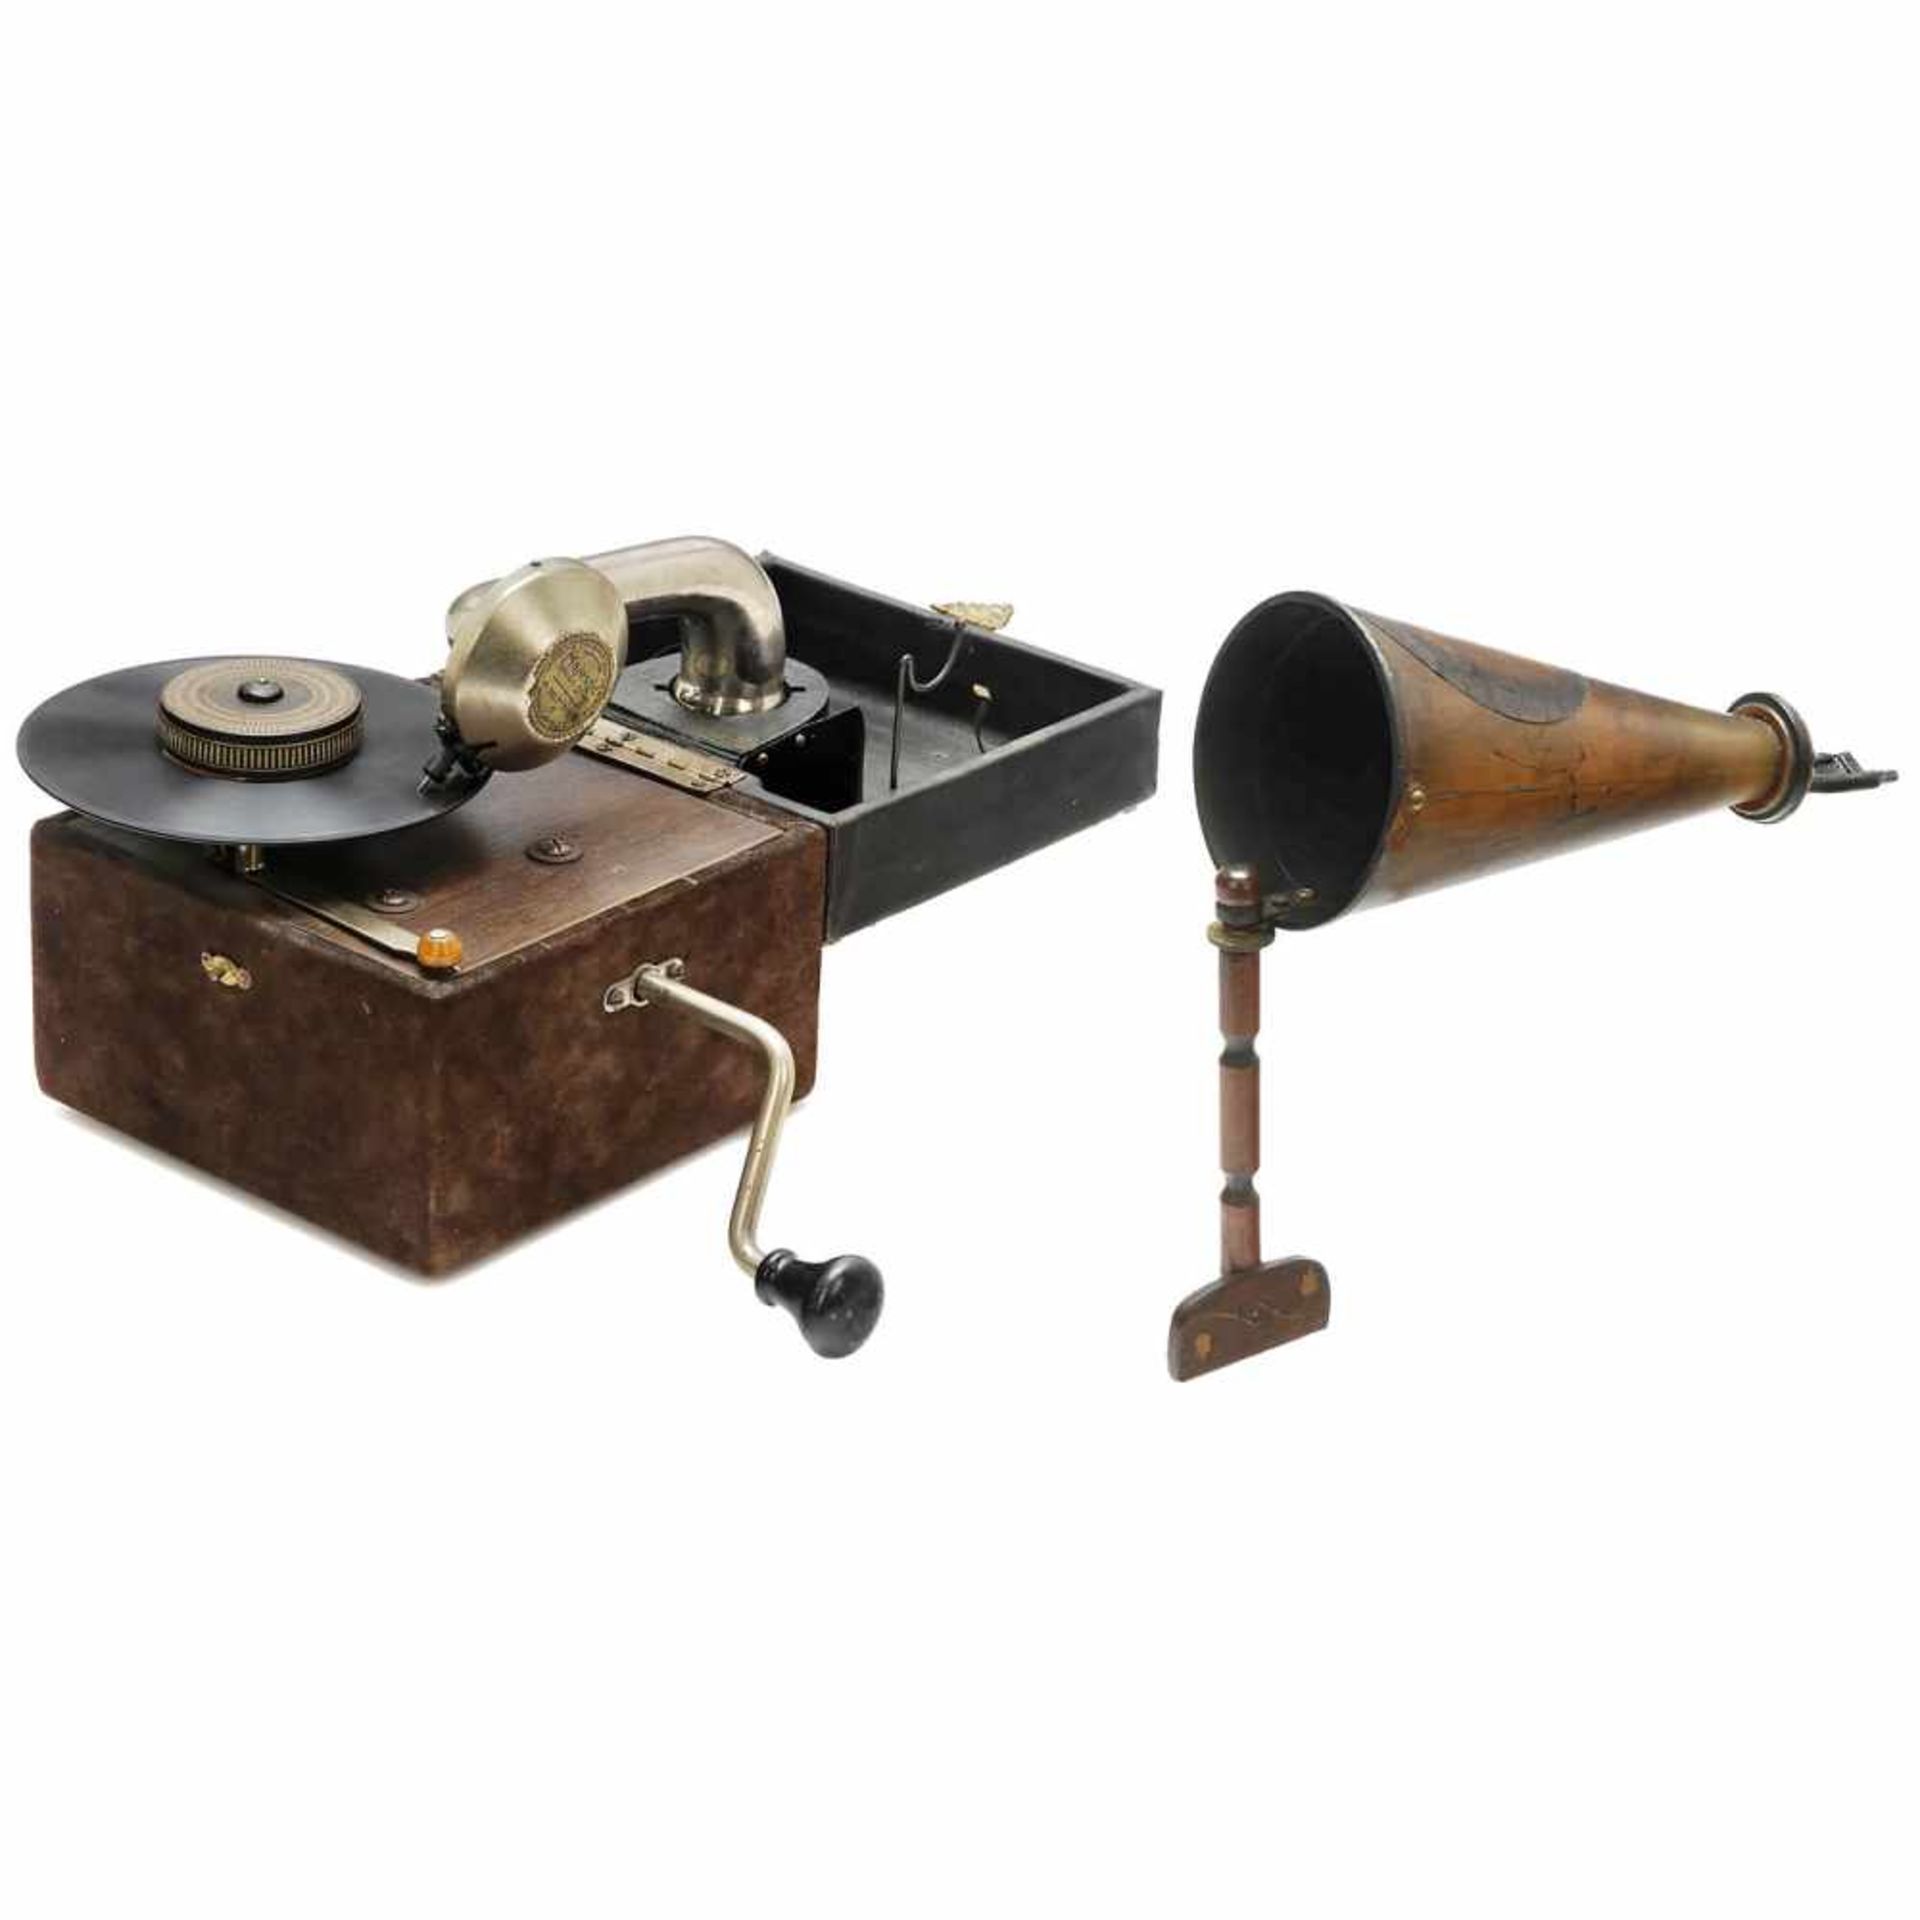 Pet-O-Fone Portable Gramophone, c. 1925A very curious construction, with additional horn. With an